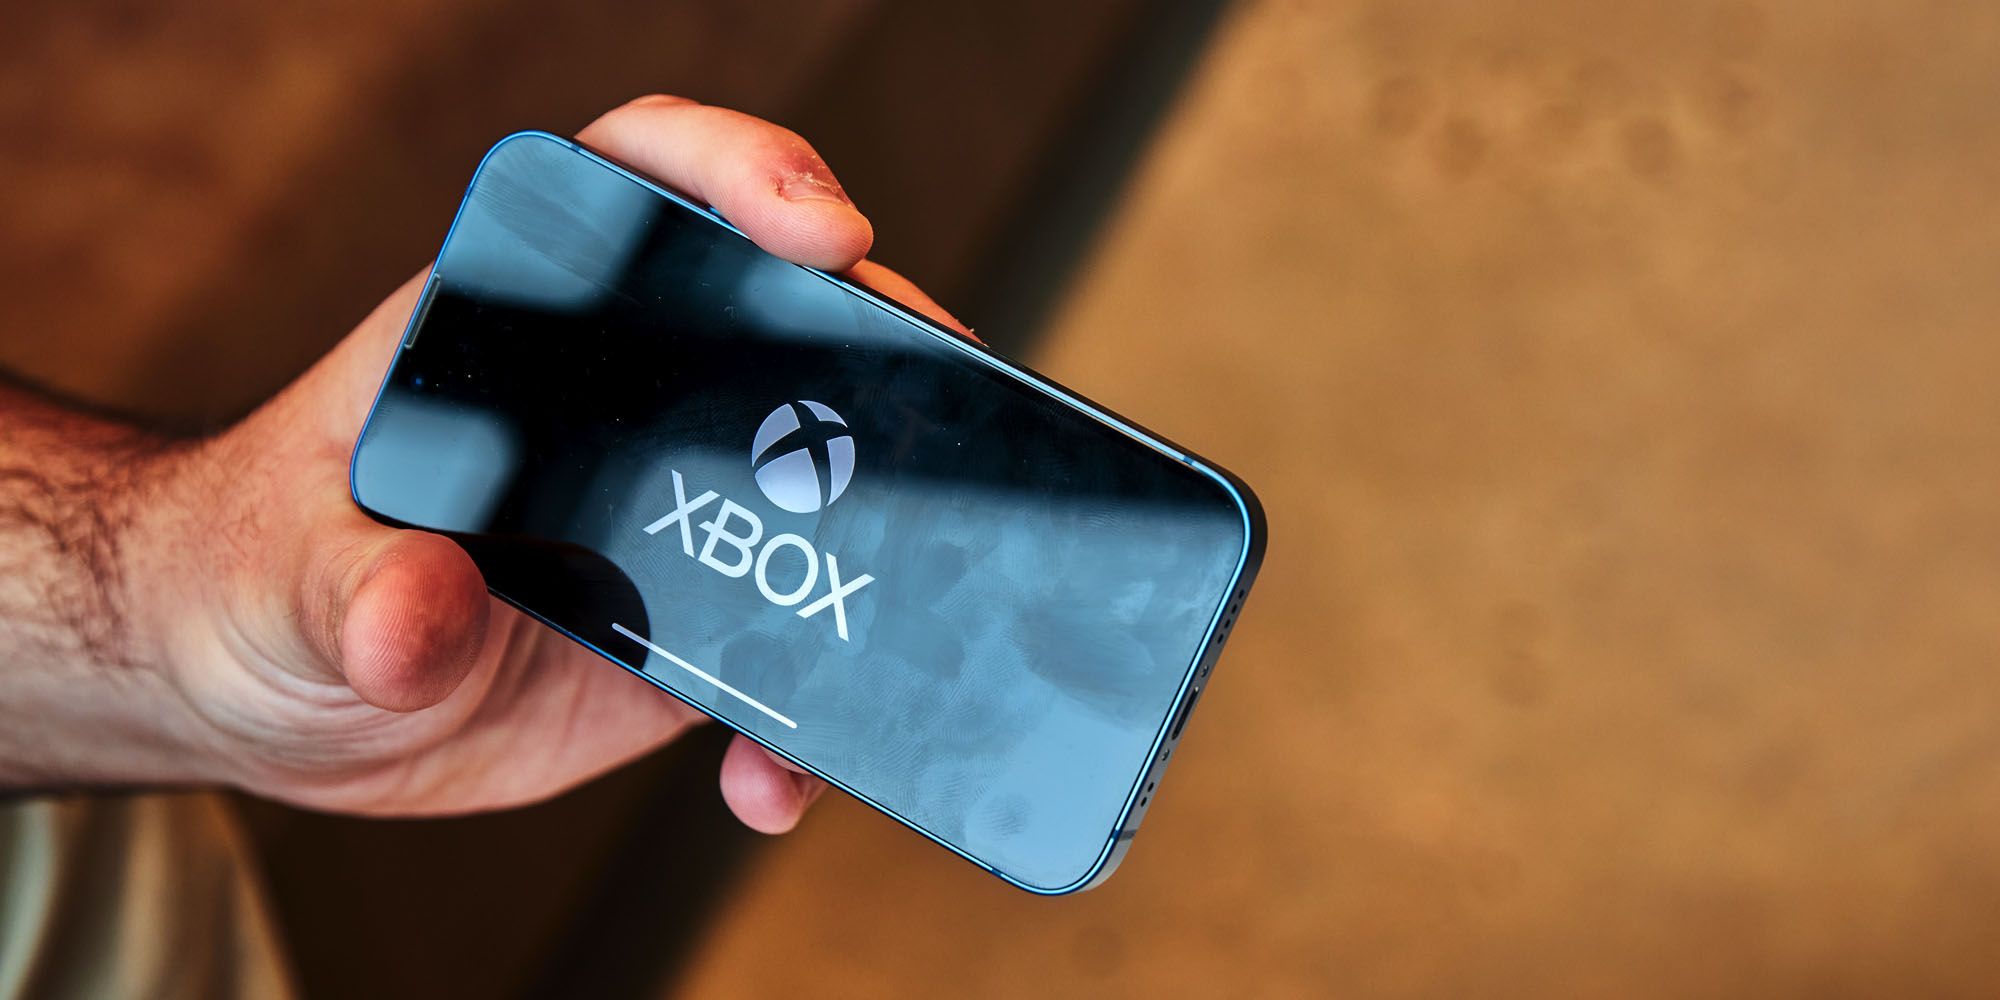 Hands on: Xbox Cloud Gaming on iPhone and iPad